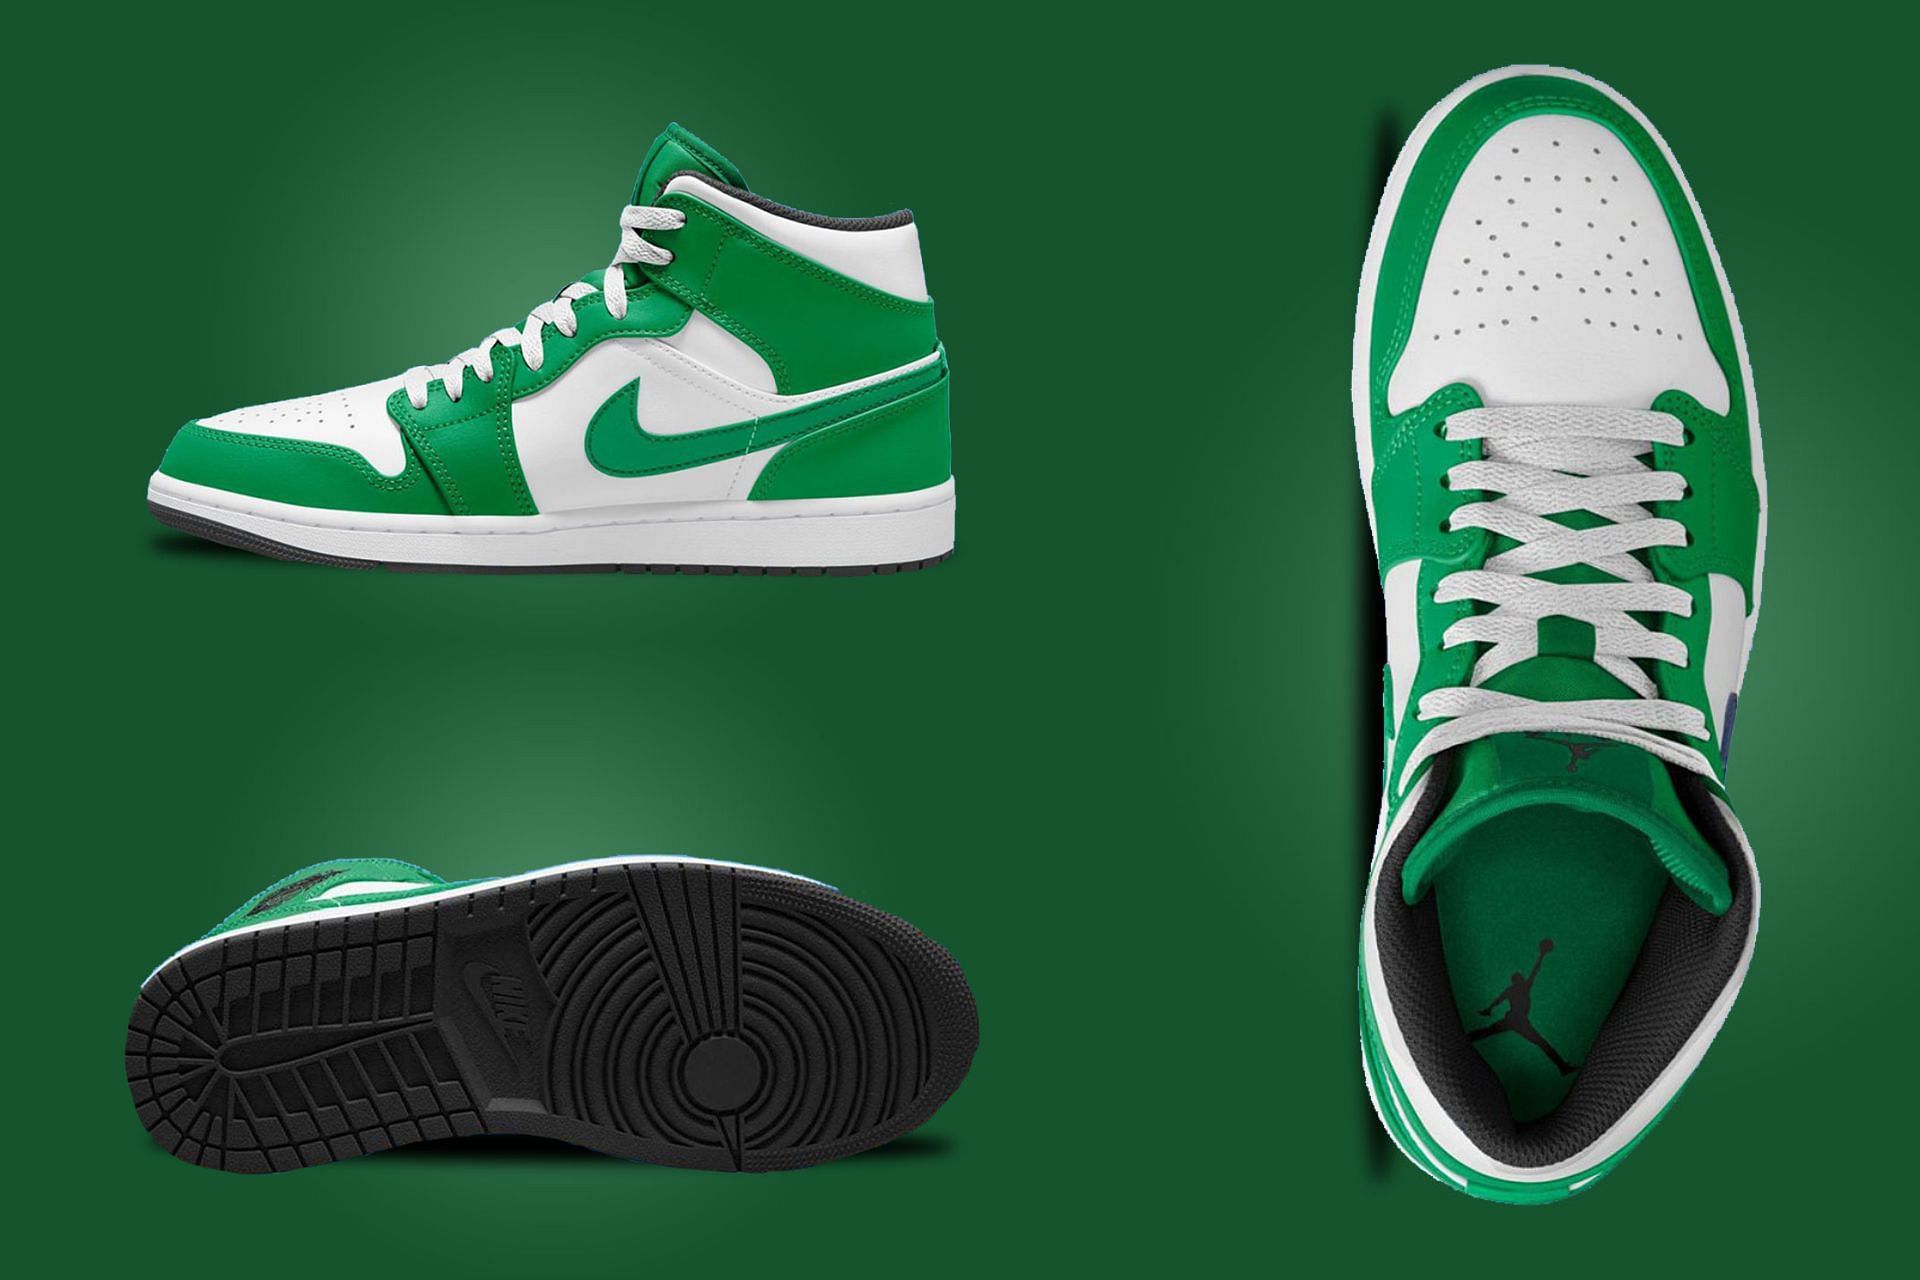 Where to buy Nike Air Jordan 1 Mid "Celtics" sneakers? Price and more